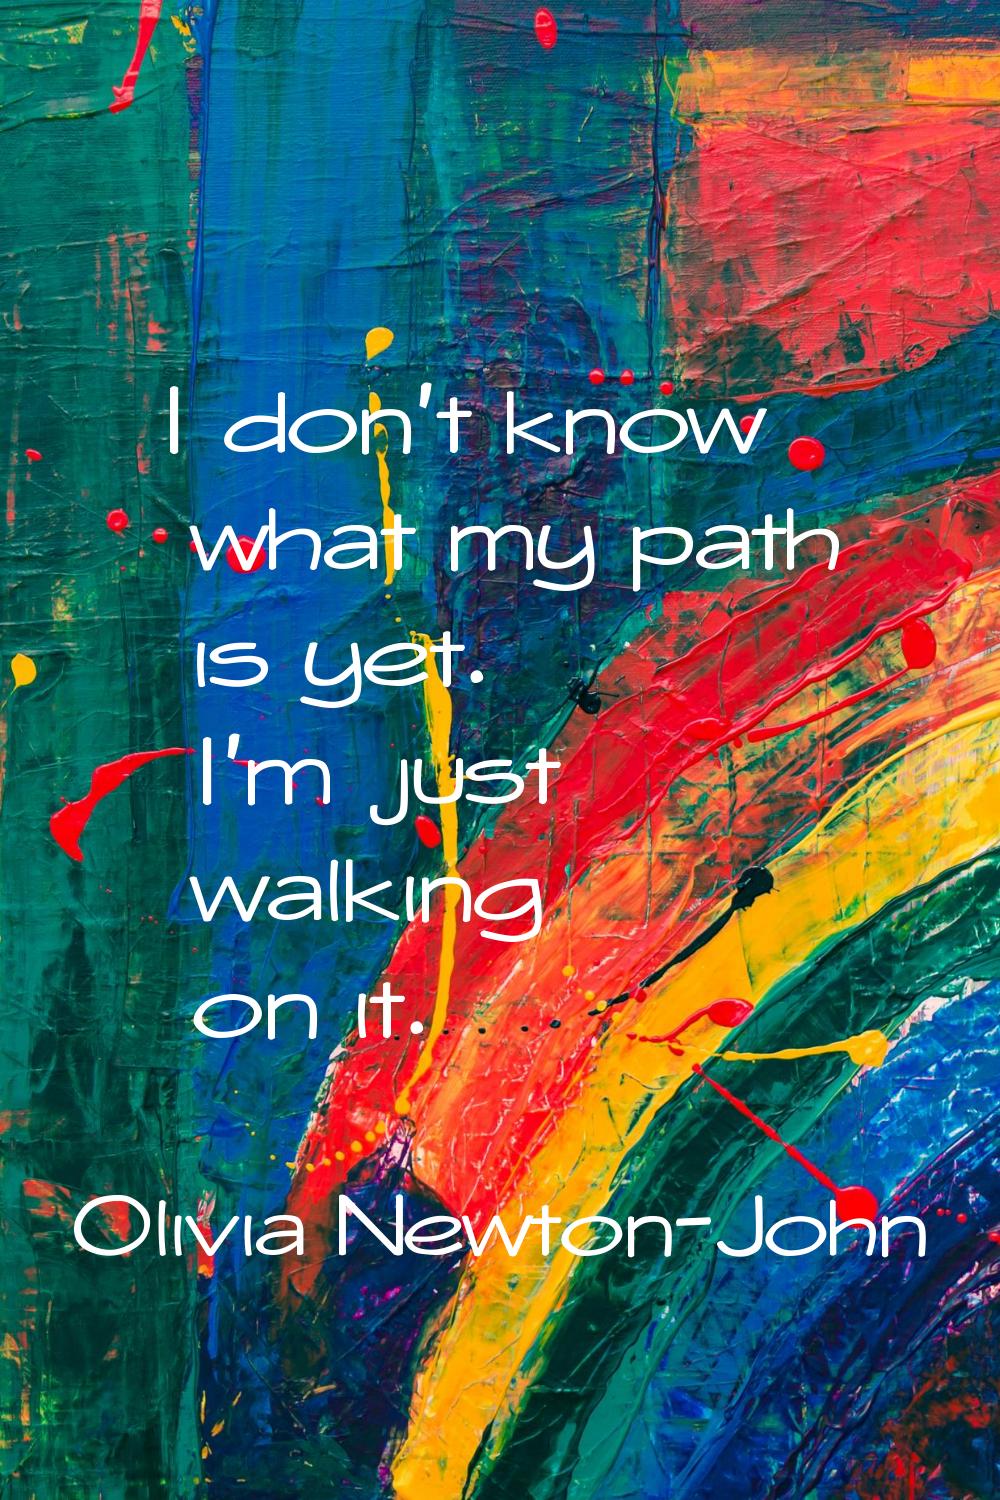 I don't know what my path is yet. I'm just walking on it.